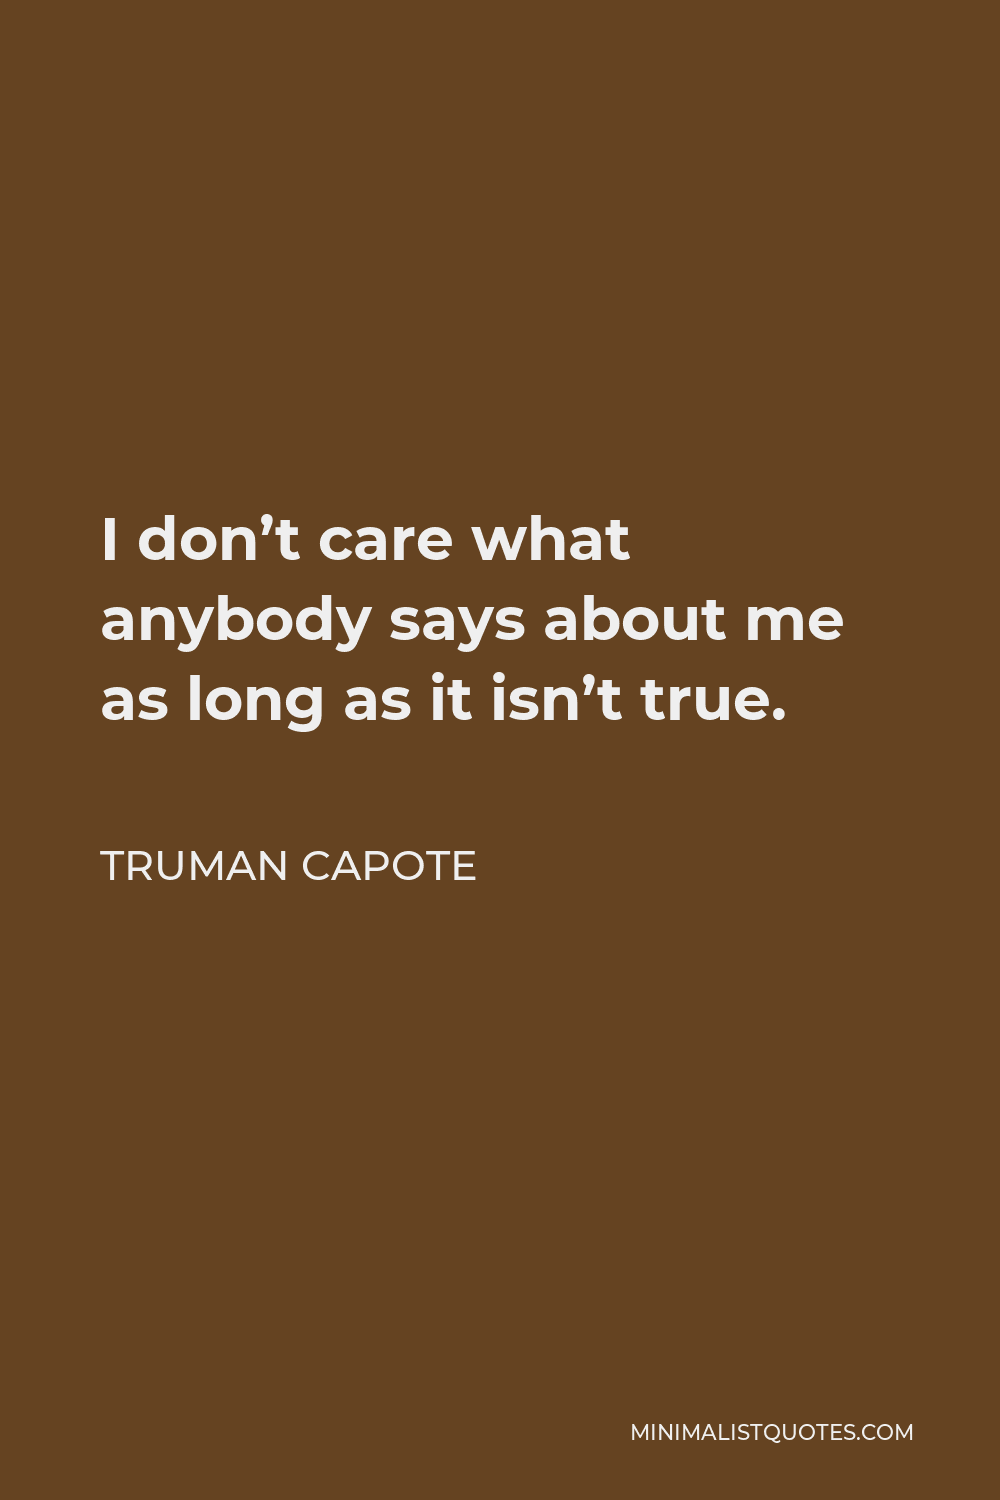 Truman Capote Quote I Don T Care What Anybody Says About Me As Long As It Isn T True